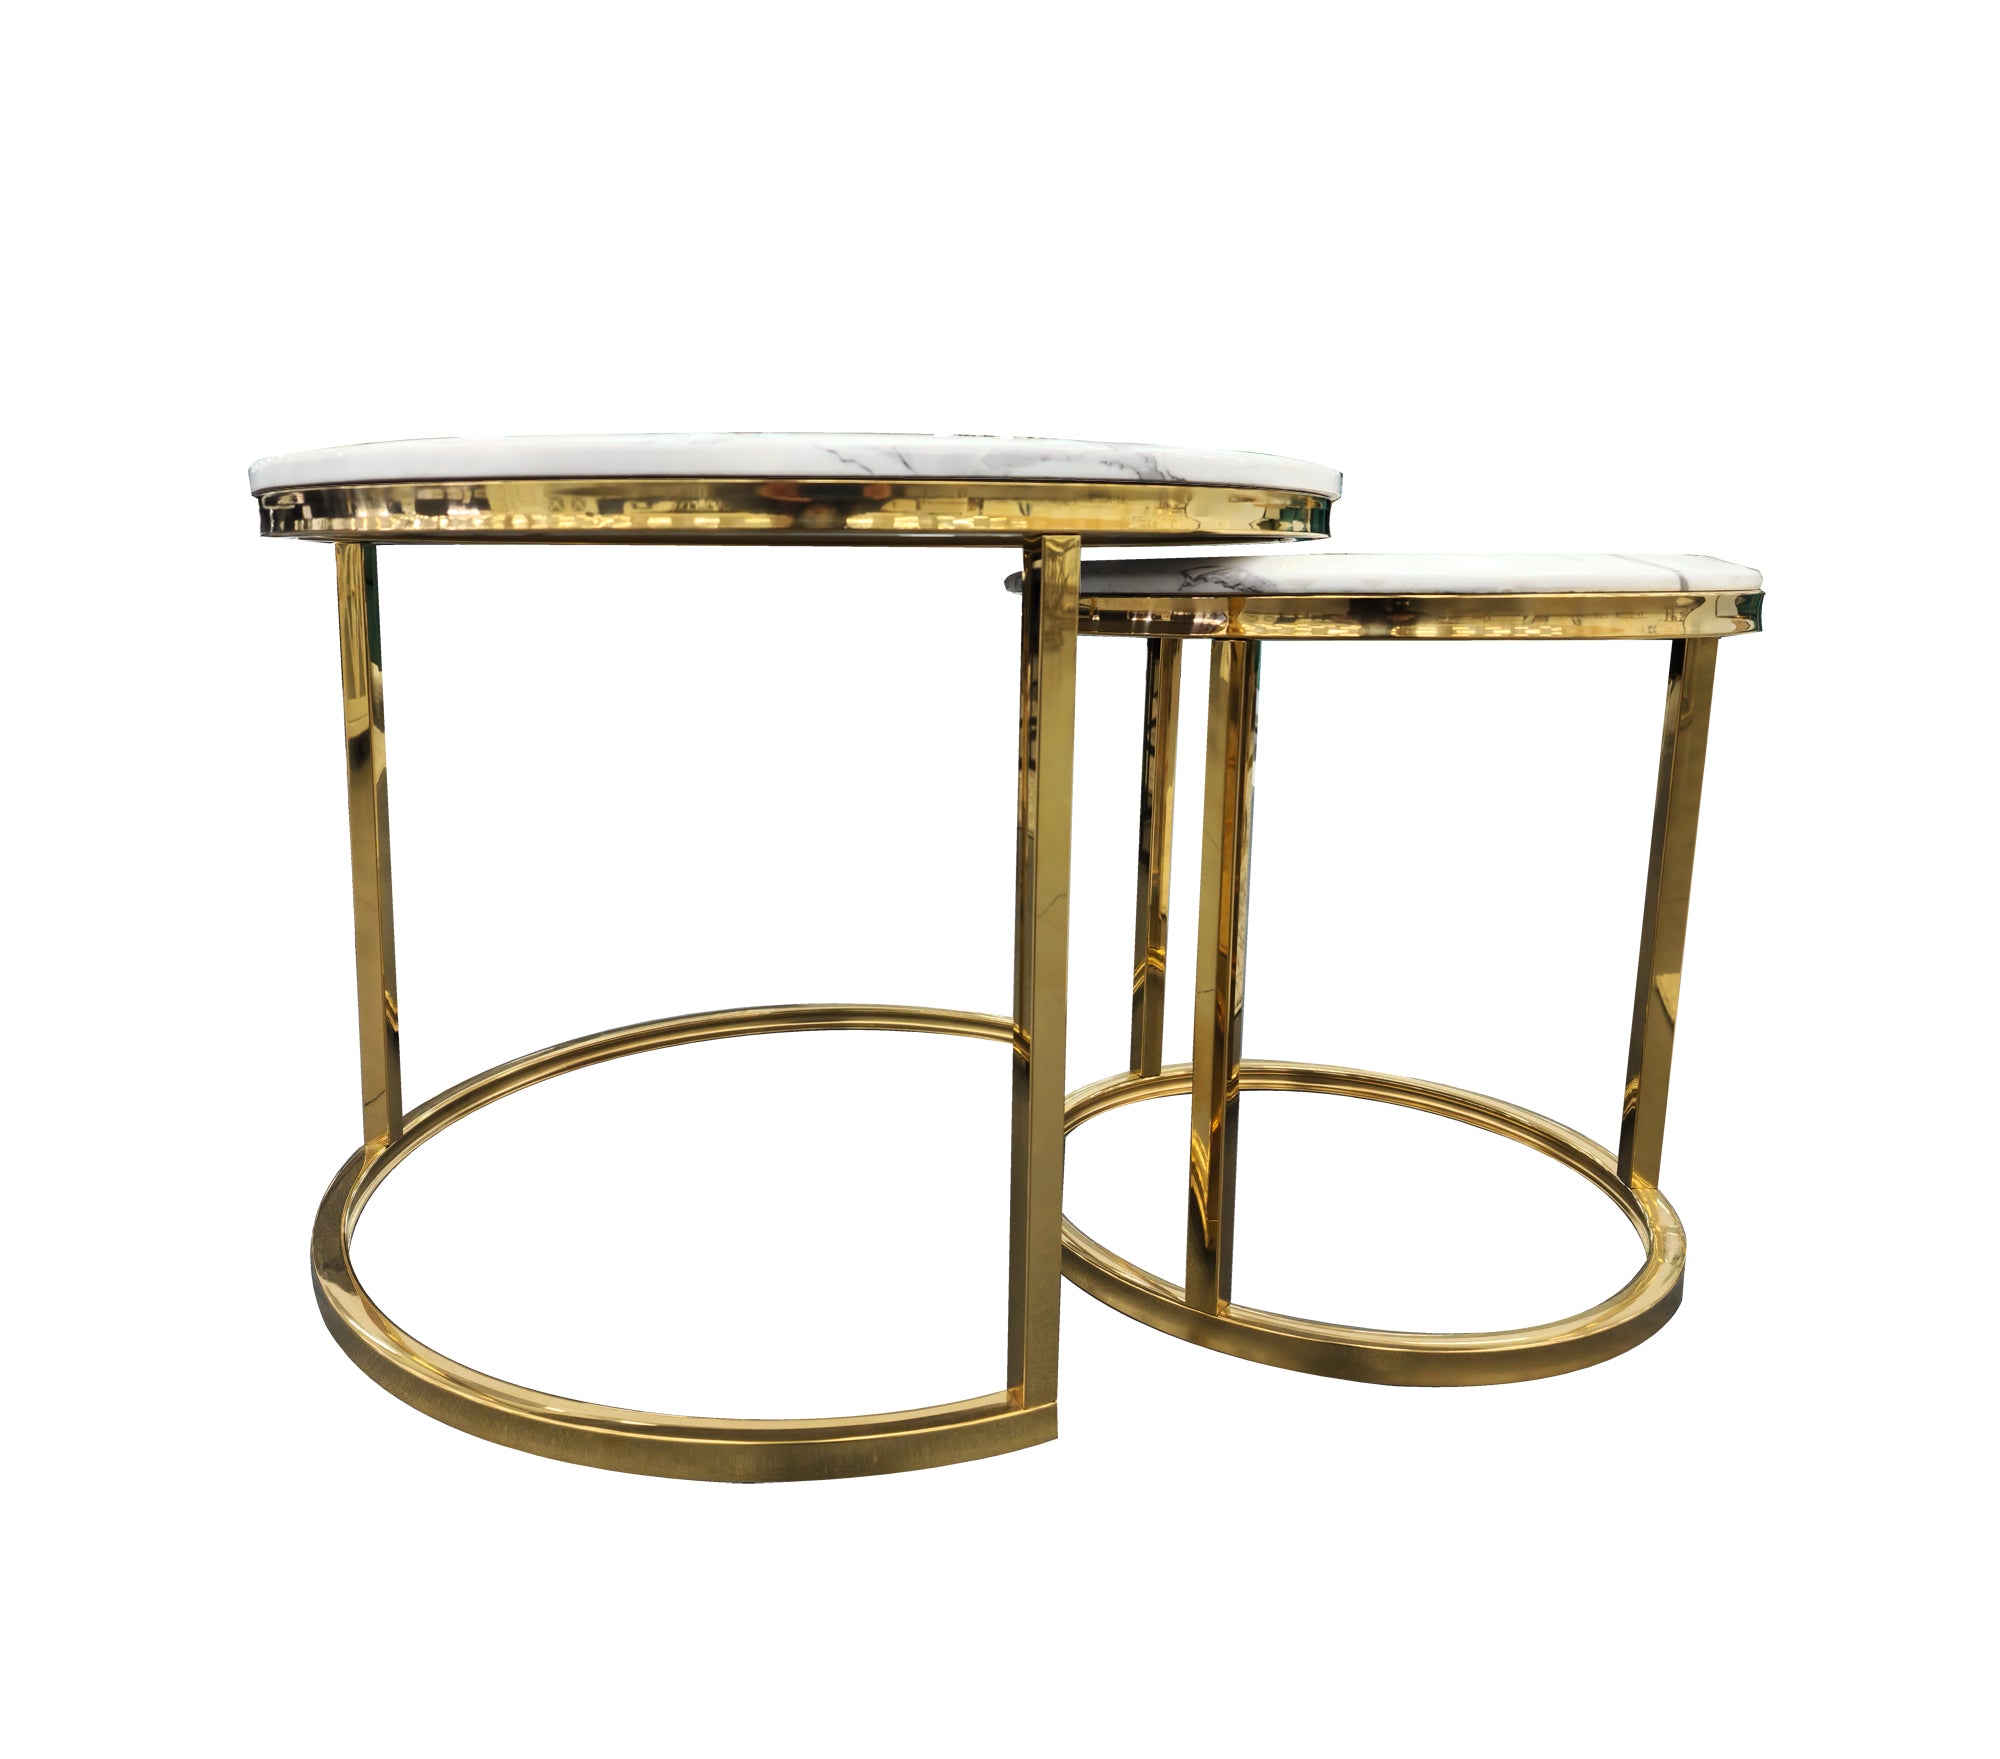 Nesting style Coffee Table – White on Gold – 60cm/40cm